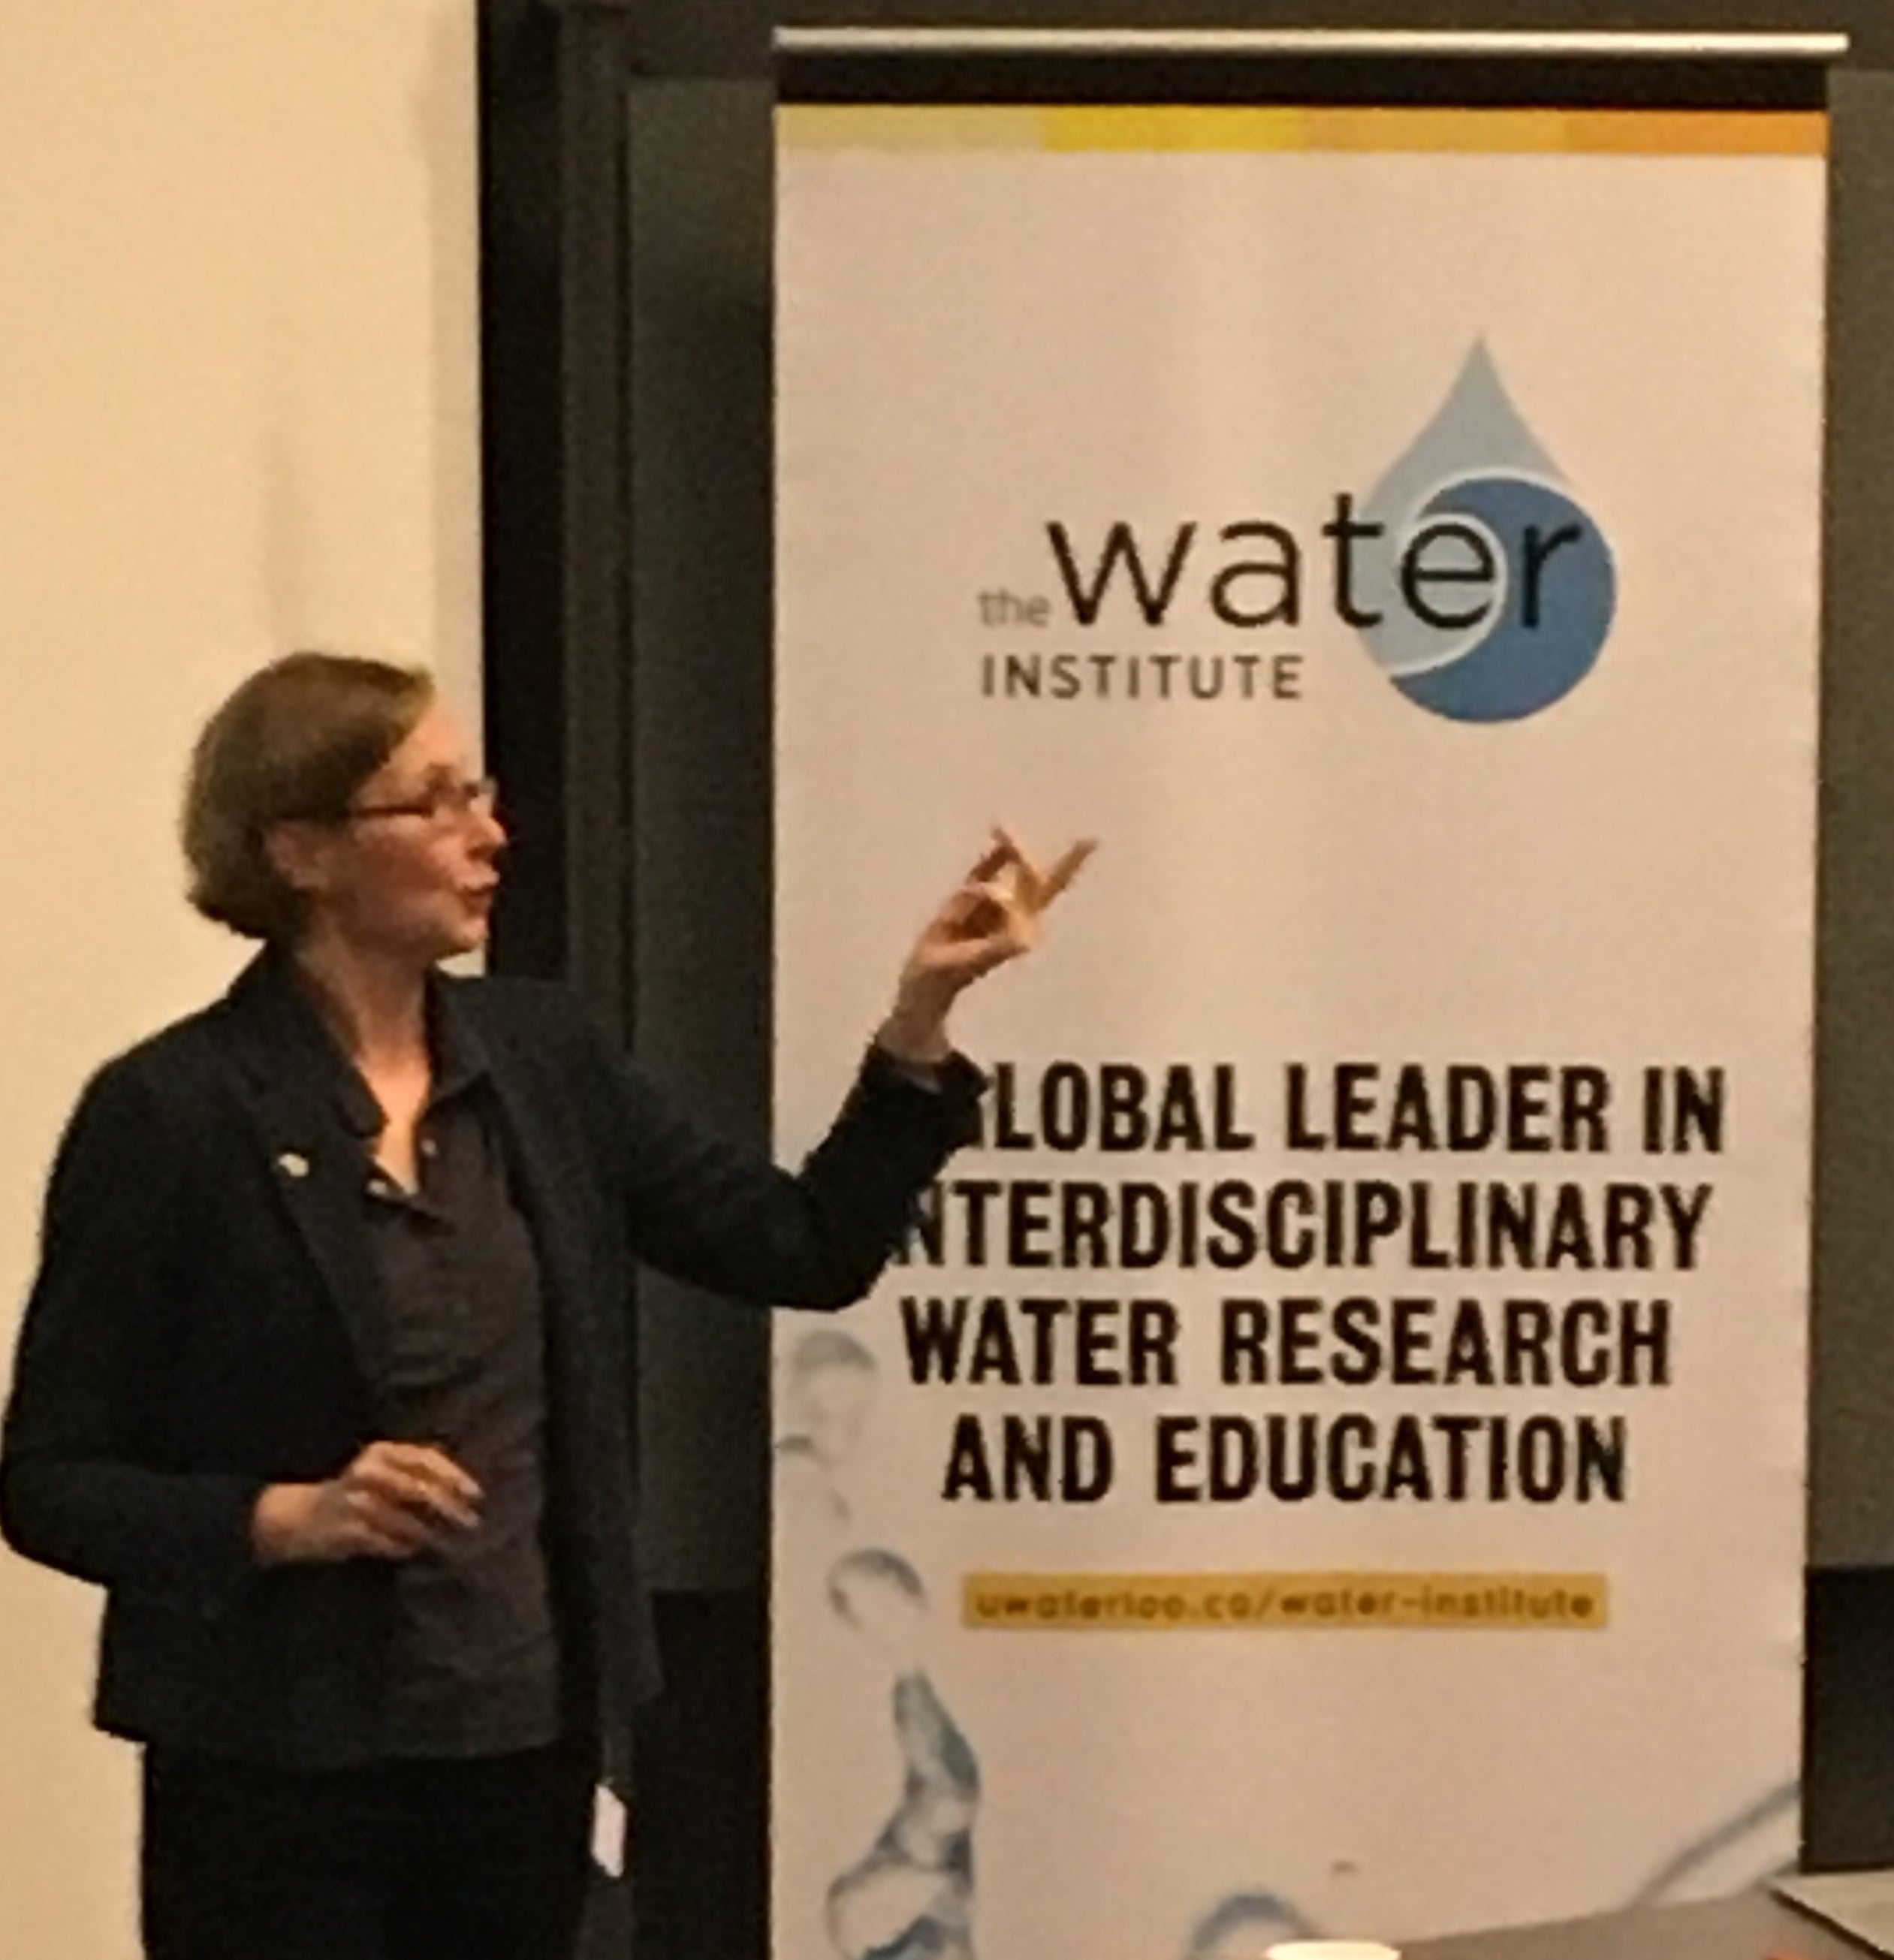 Dr. Antje Witting presents WaterTalk